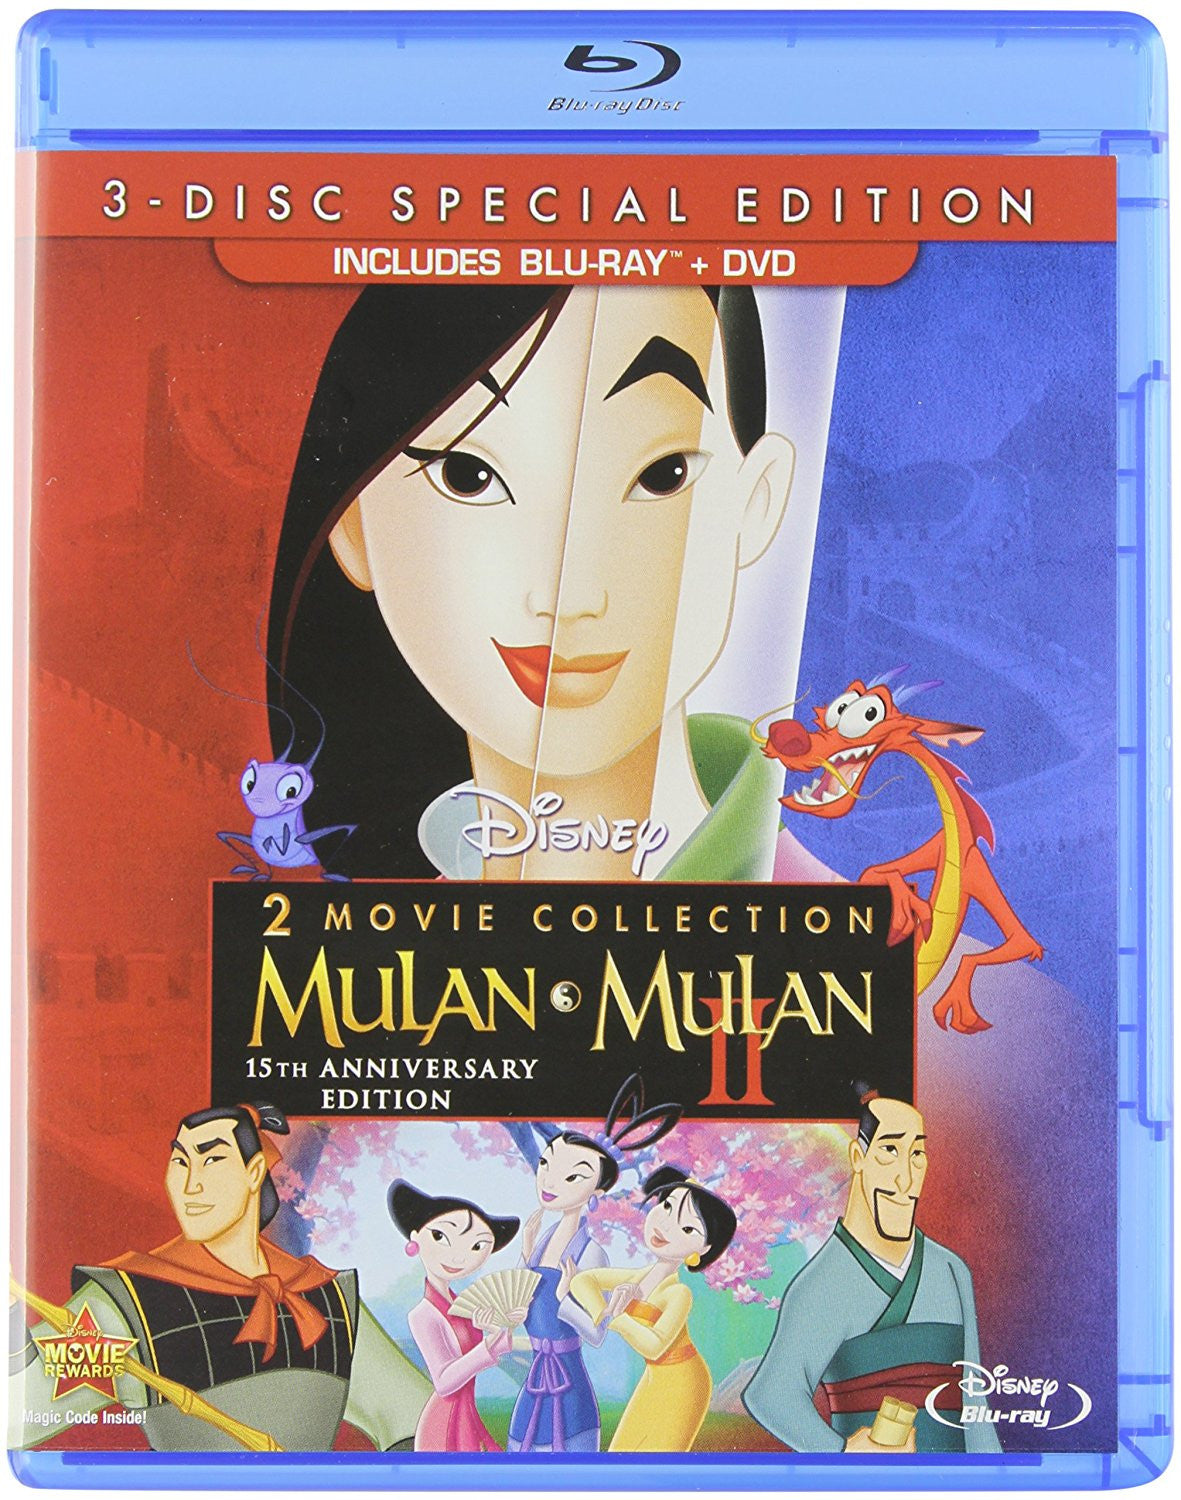 Mulan: 2-Movie Collection (3-Disc Special Edition) (Blu-ray + DVD